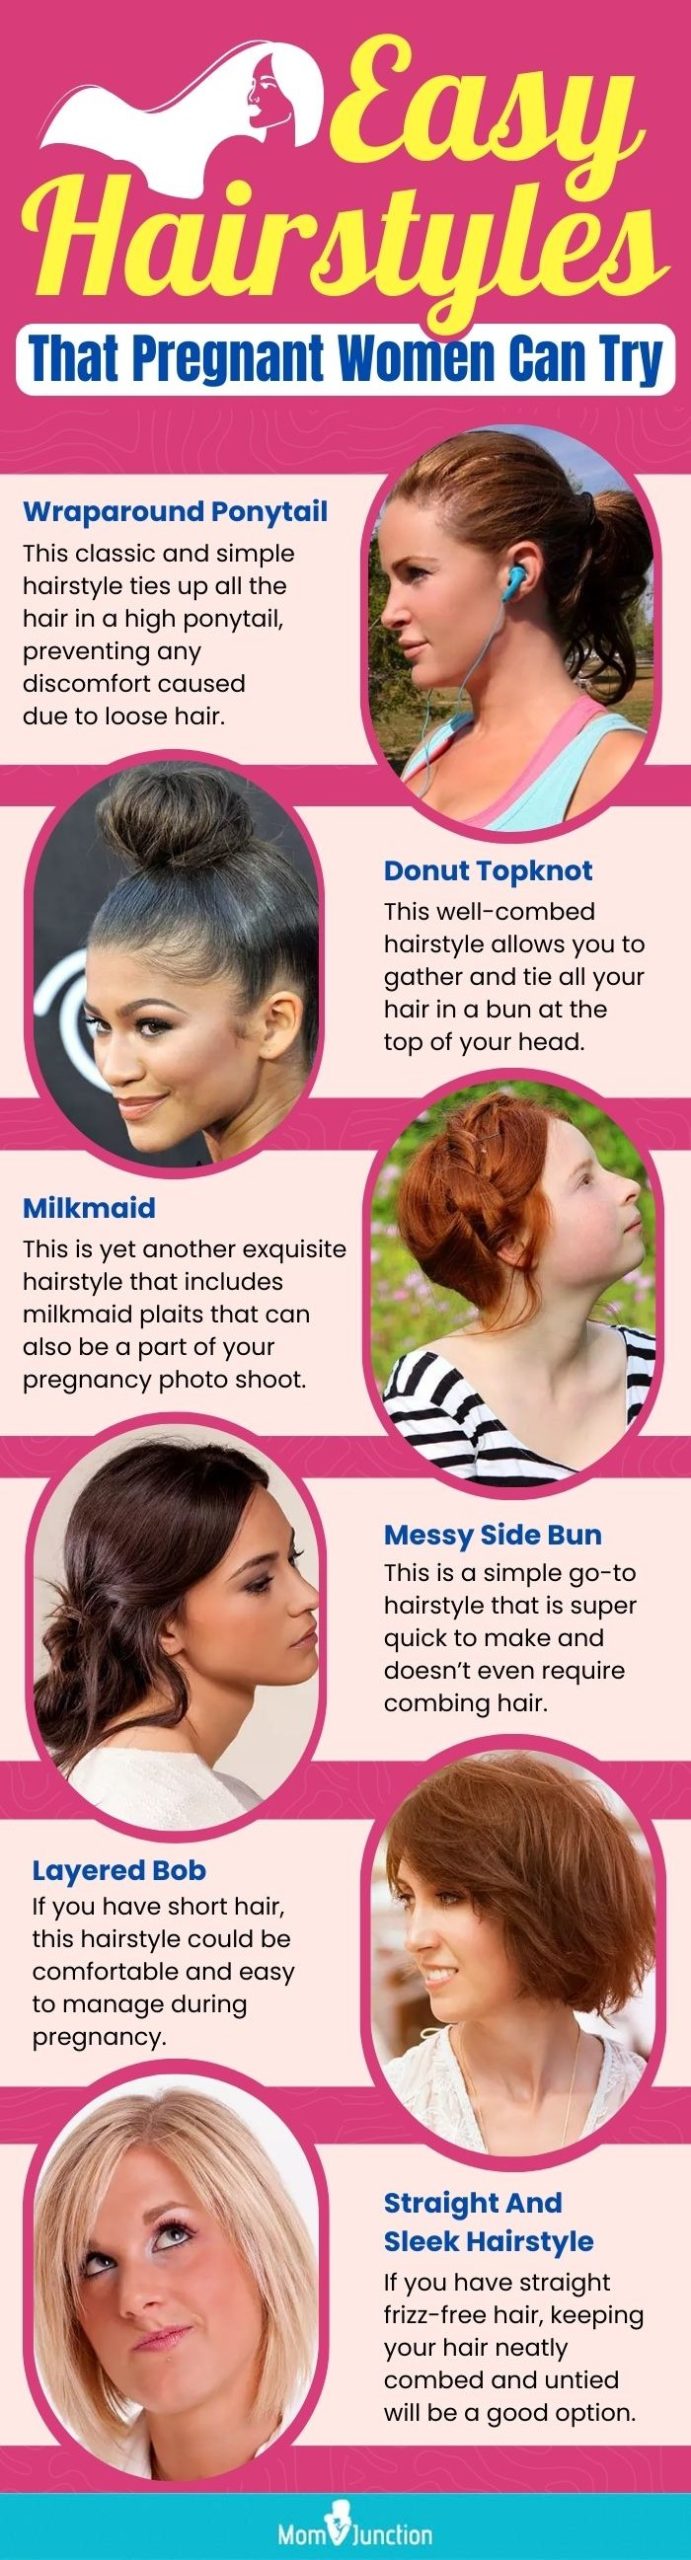 The Most Flattering Hairstyles for Oval Faces